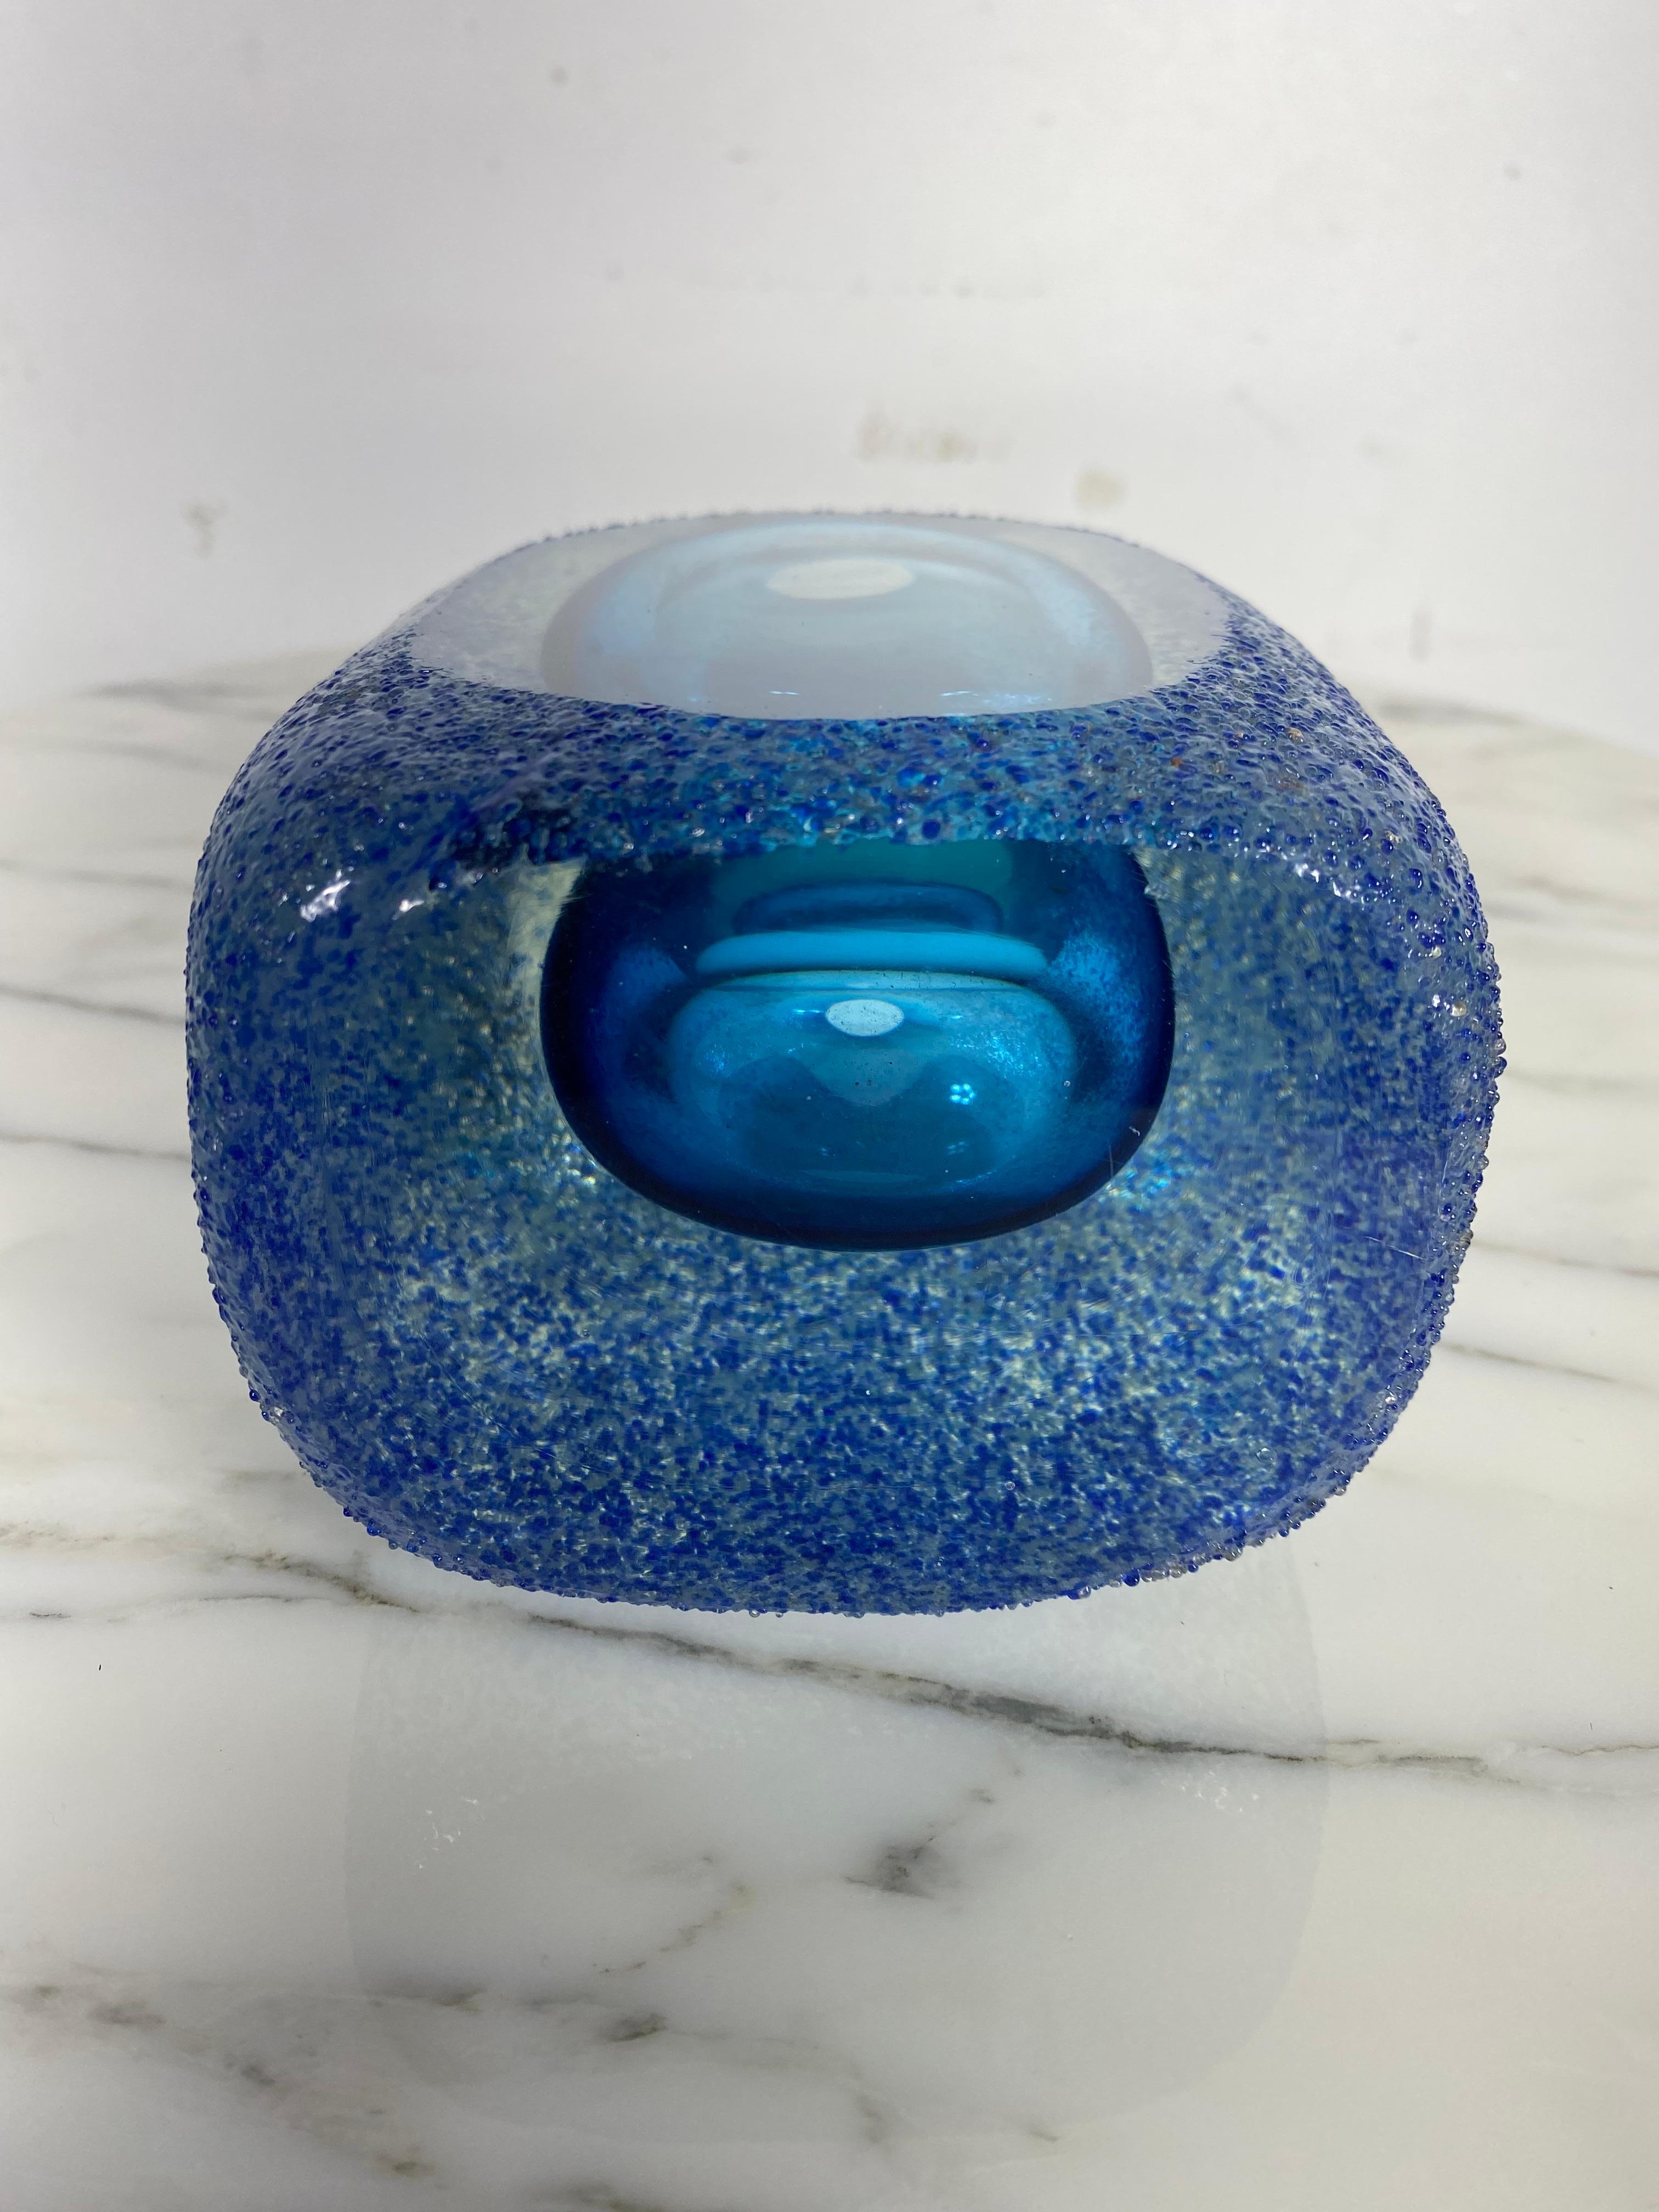 Murano Sommerso Cobalt and Azure BlueTextured Glass Vase In Good Condition For Sale In Buffalo, NY